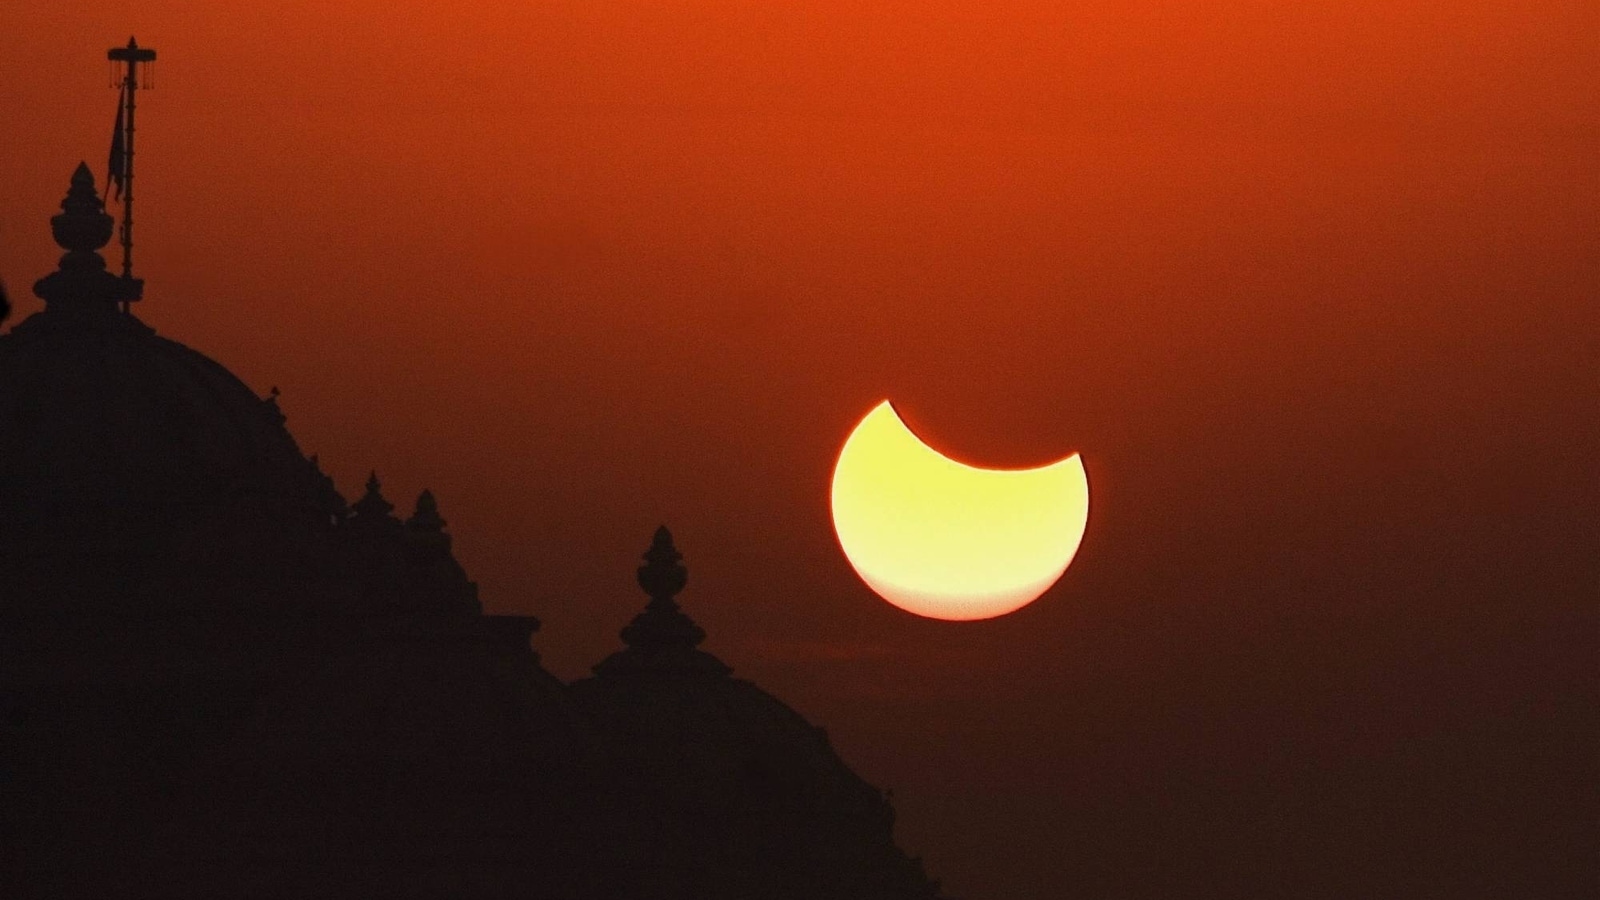 Last solar eclipse of 2022 LIVE Surya Grahan in India, watch